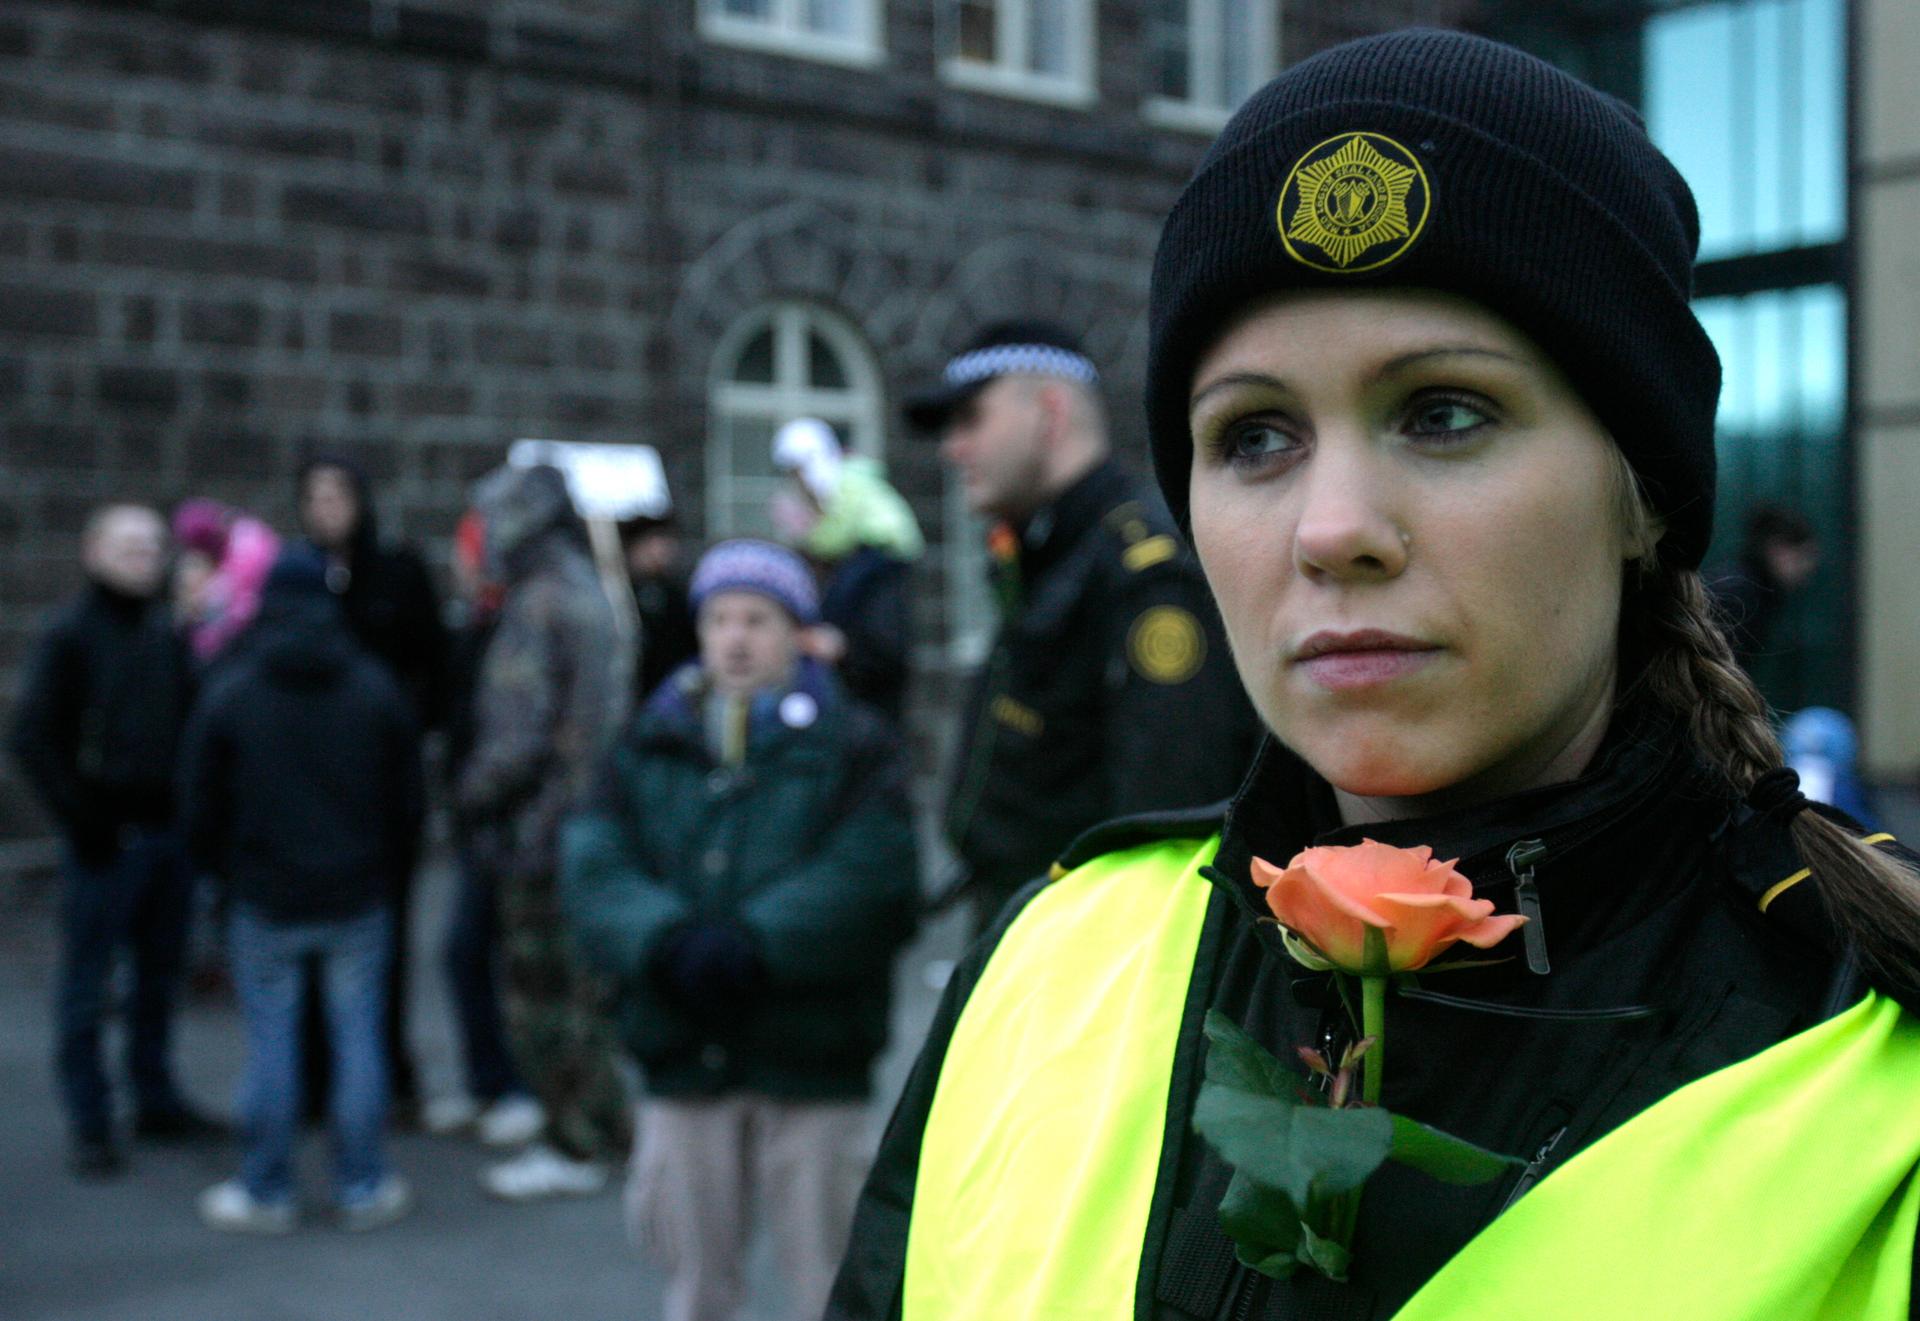 An Icelandic police officer stands guard at a peaceful protest near Iceland's Parliament house in Reykjavik 